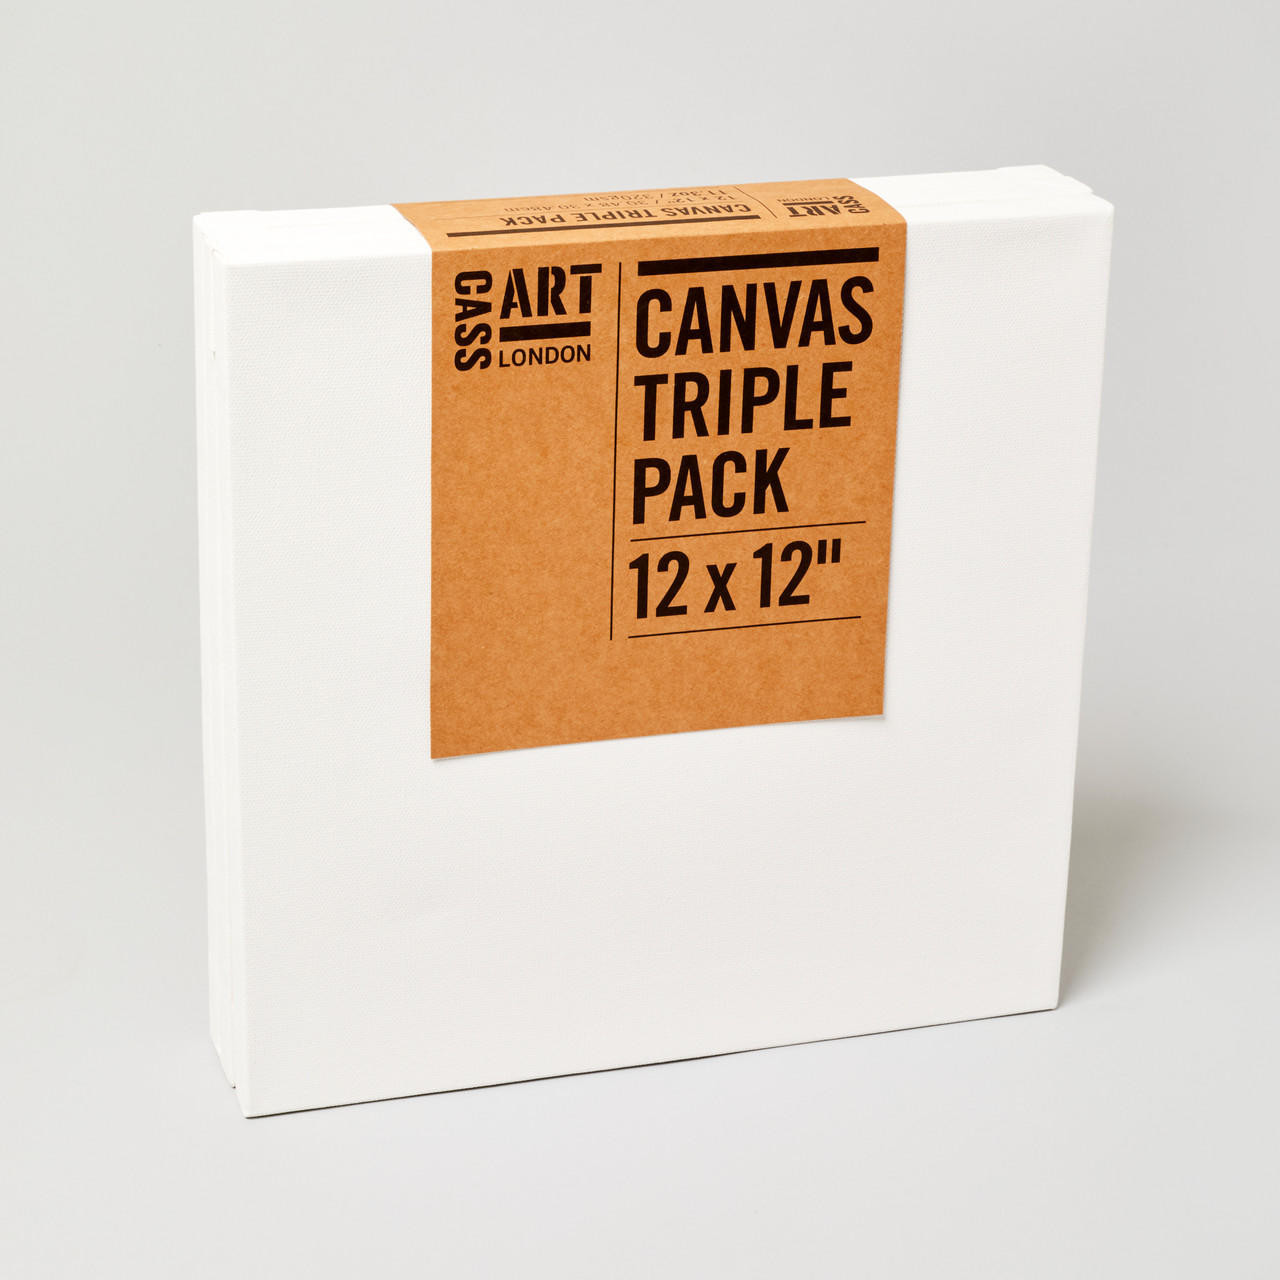 Cass Art Cotton Canvas 19mm Triple Pack 12 x 12 inches